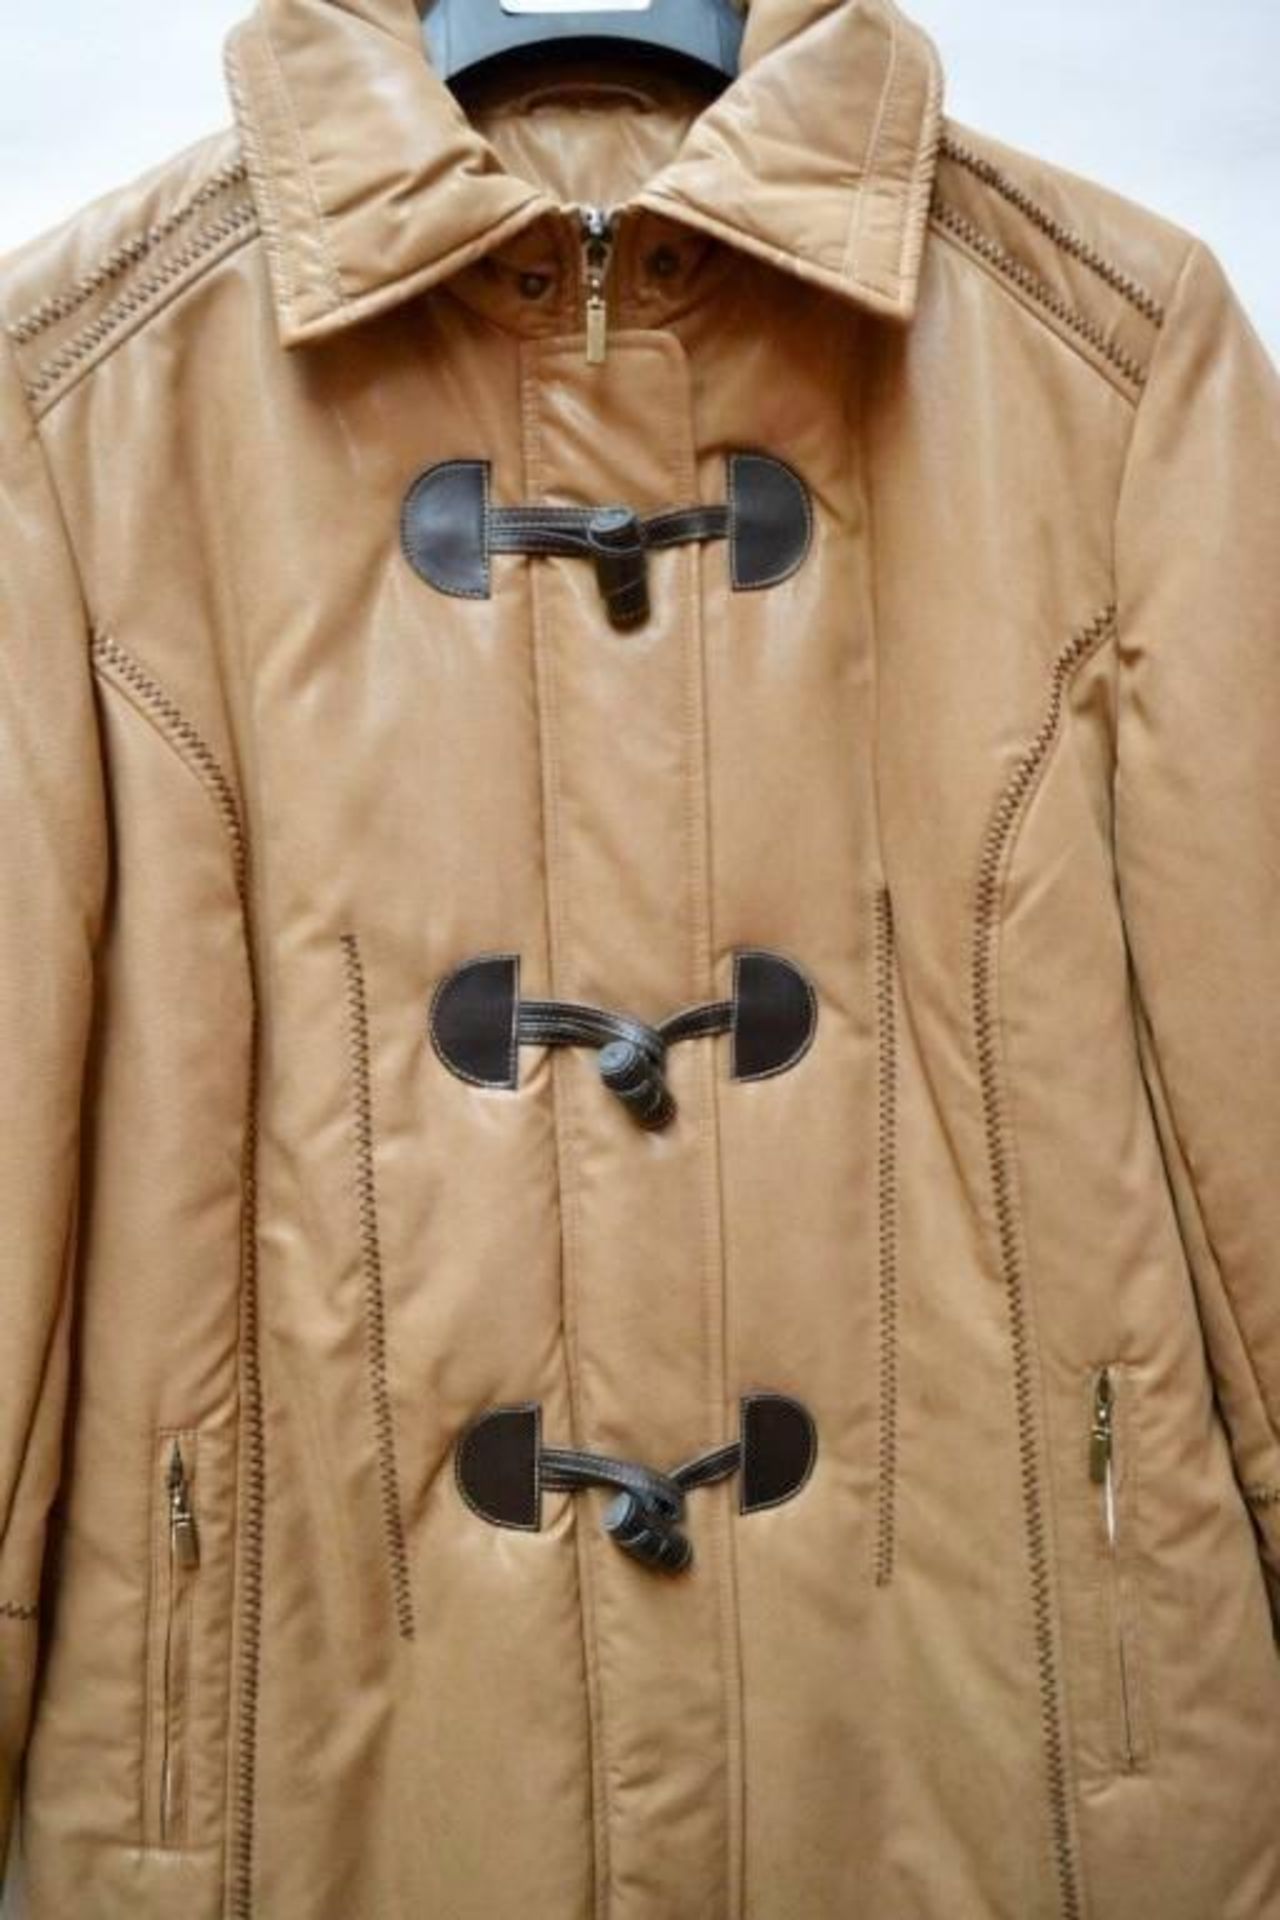 1 x Steilmann Kirsten Womens Padded Winter Coat In A Tan Faux Leather - Size 12 - CL210 - Ref MT606 - Image 3 of 3